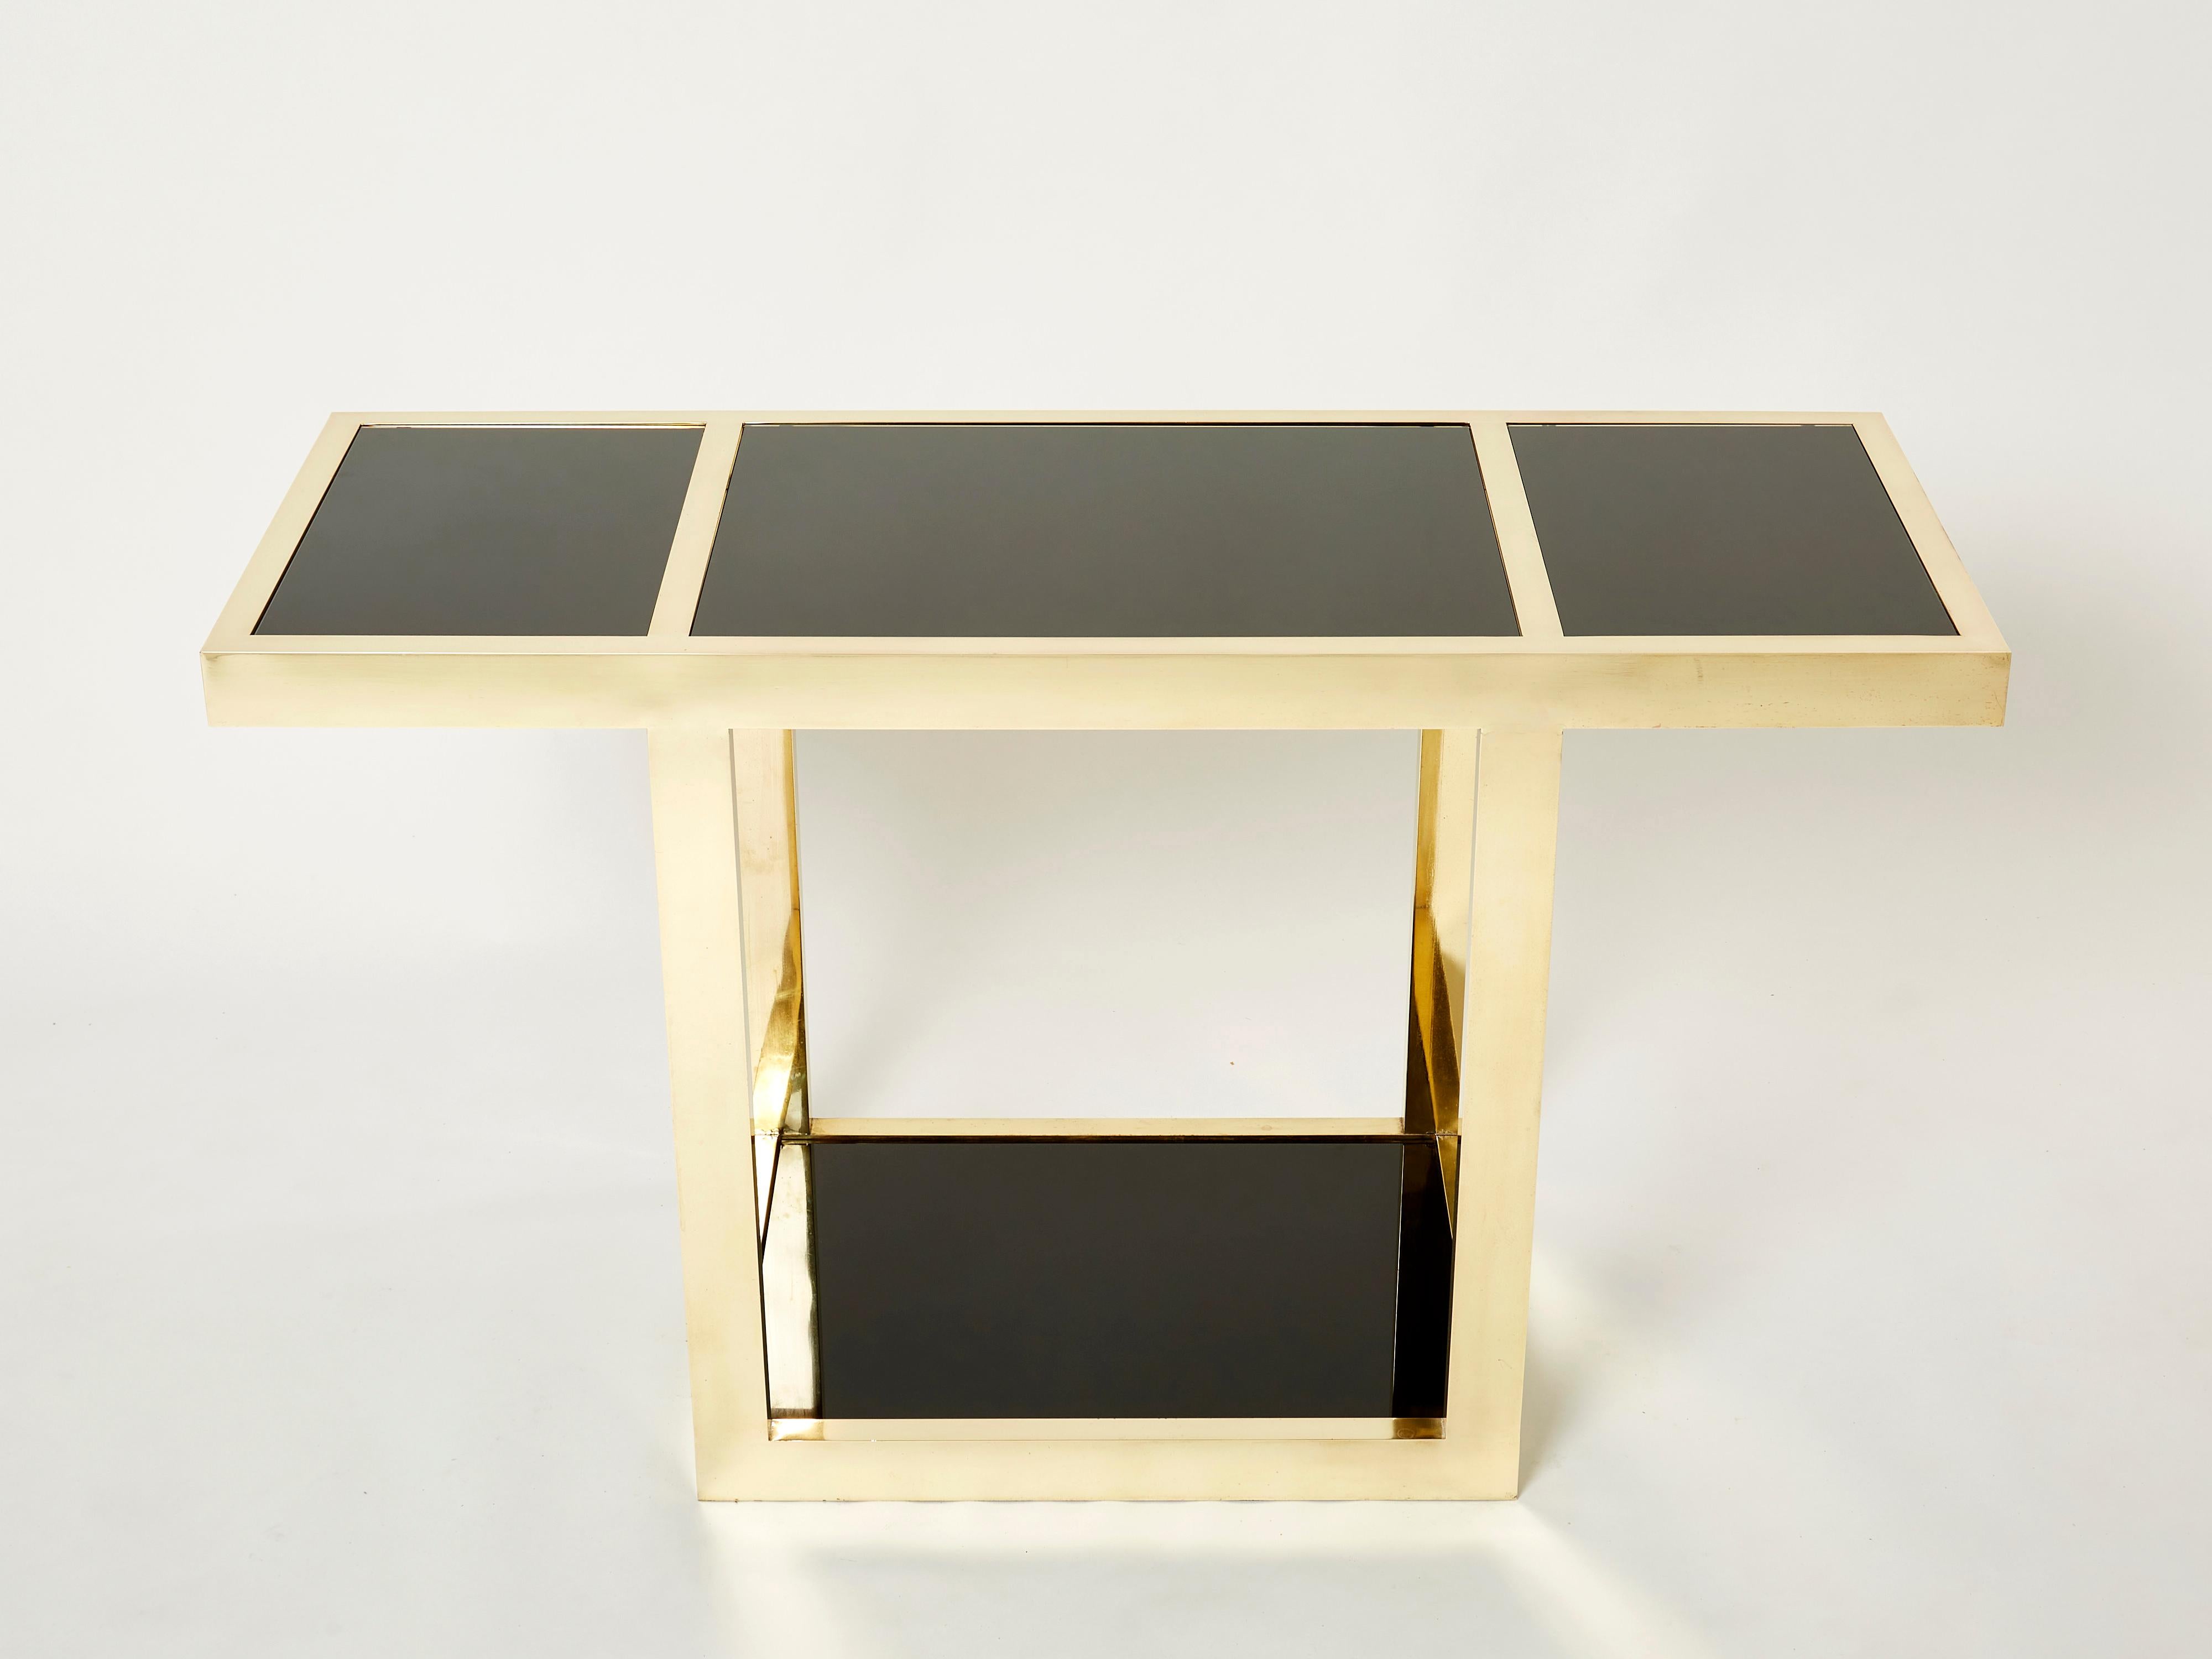 This Puzzle console table made by Gabriella Crespi is part of the série Plurimi from 1973. The design was composed of several sections that could be used independently as consoles or arranged to form variously sized dining tables. Symmetrical brass